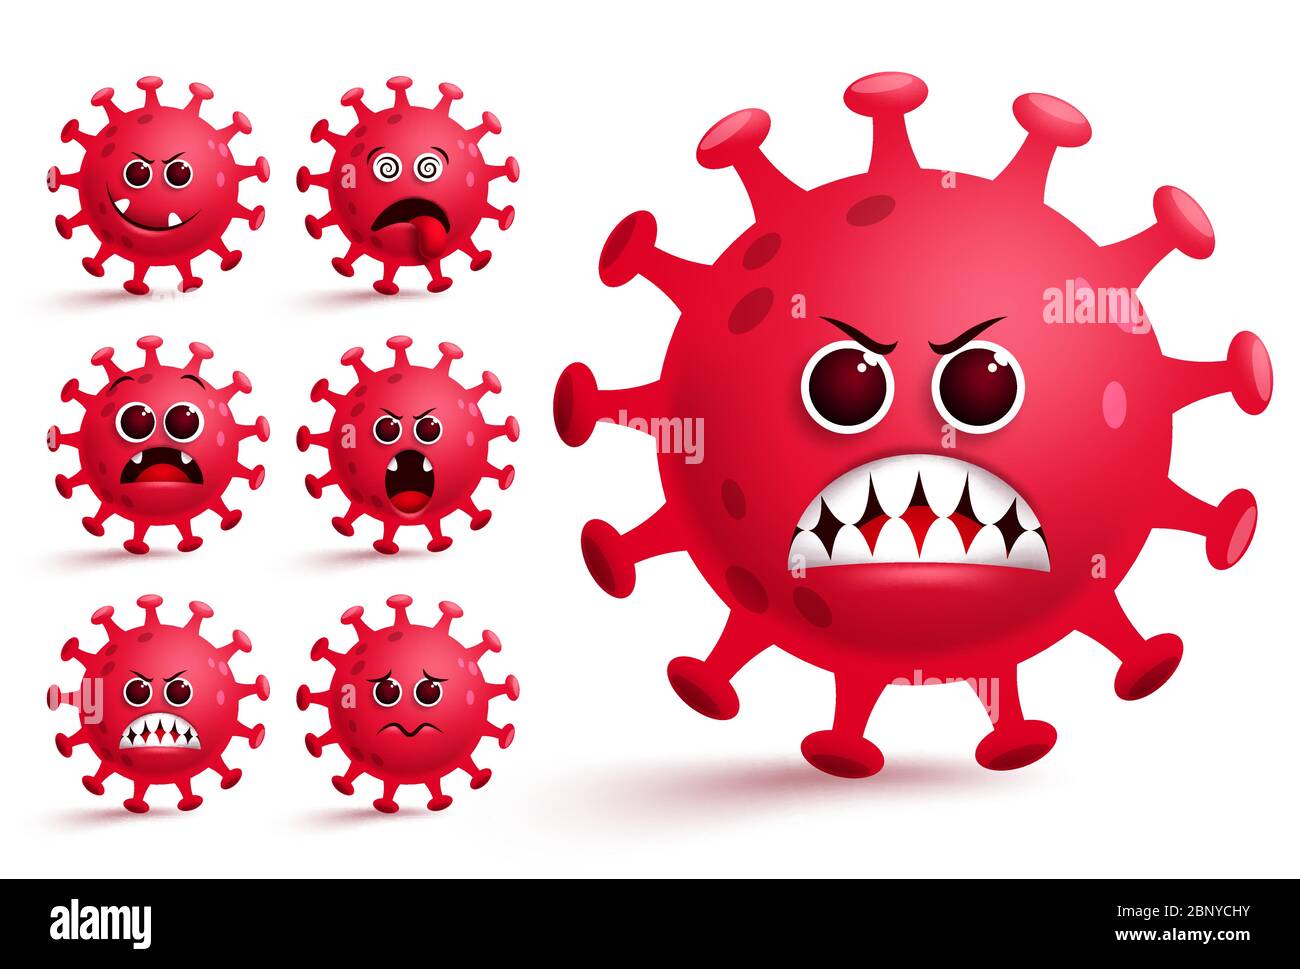 Coronavirus covid-19 emoji smiley vector set. Covid19 corona virus emoji and emoticon with red angry facial expression and emotion for global pandemic. Stock Vector